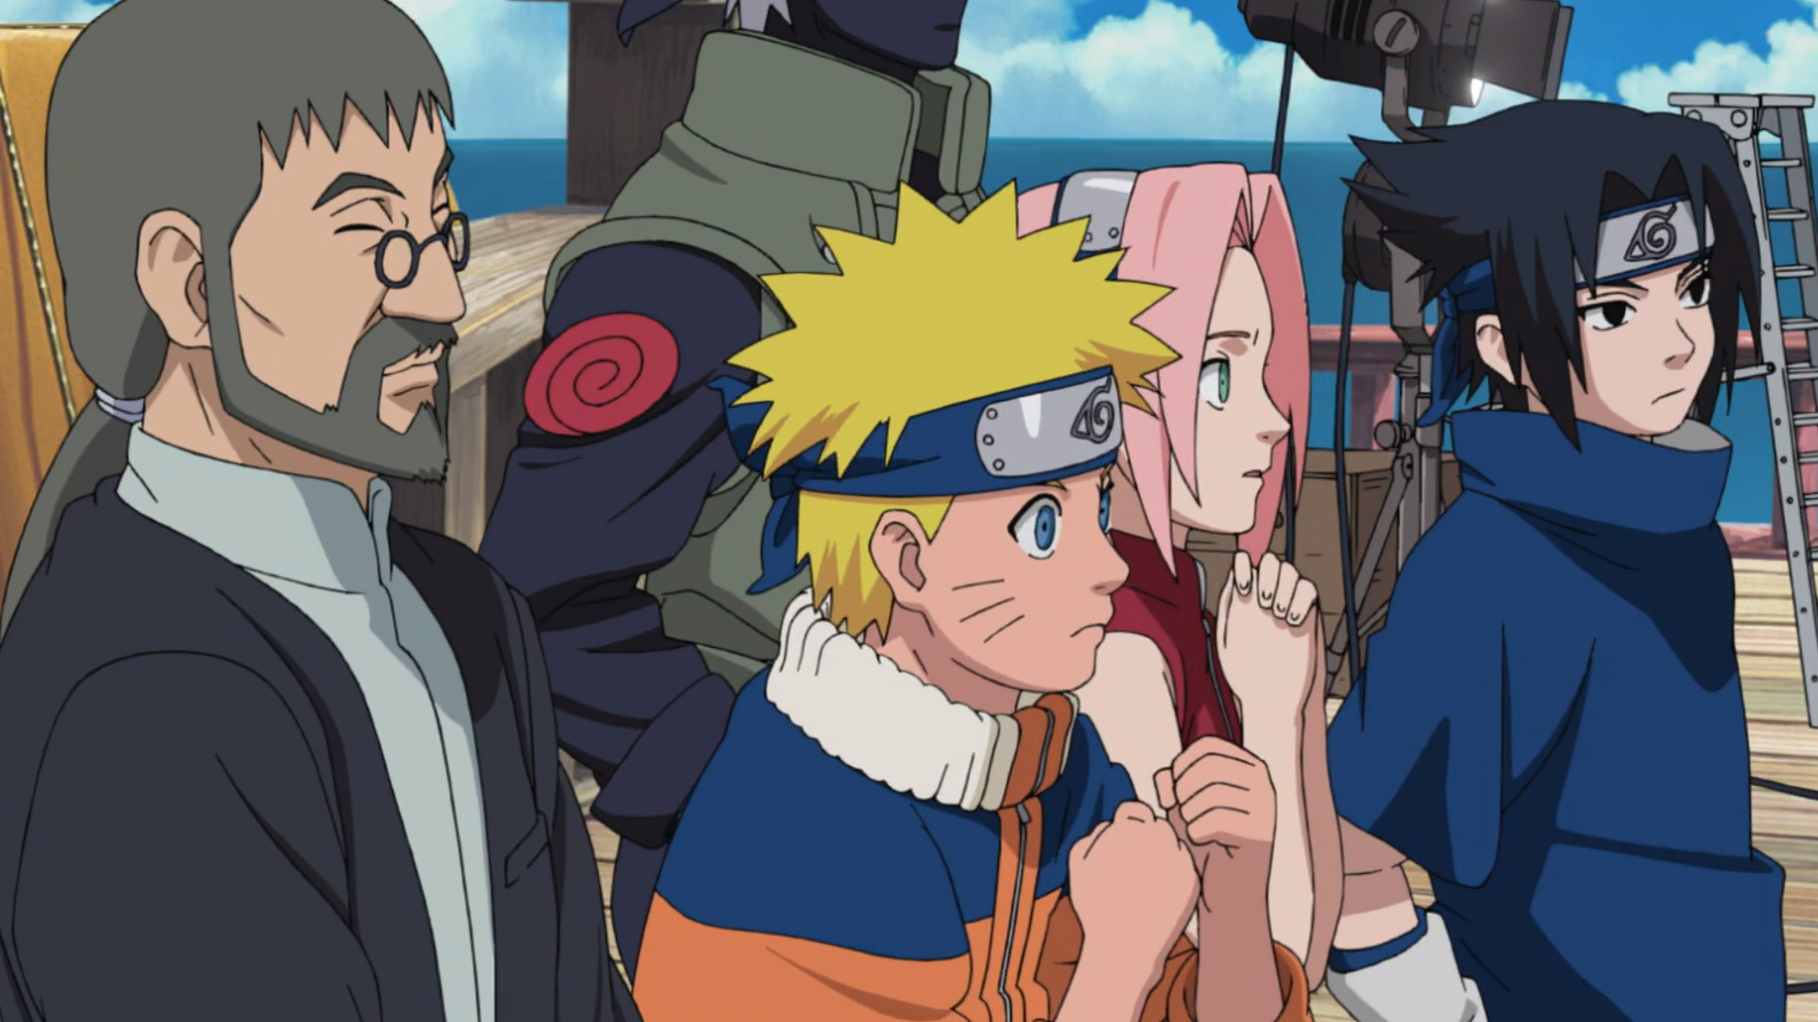 naruto-live-action-movie-by-lionsgate-gets-production-update-–-what-we-can-expect